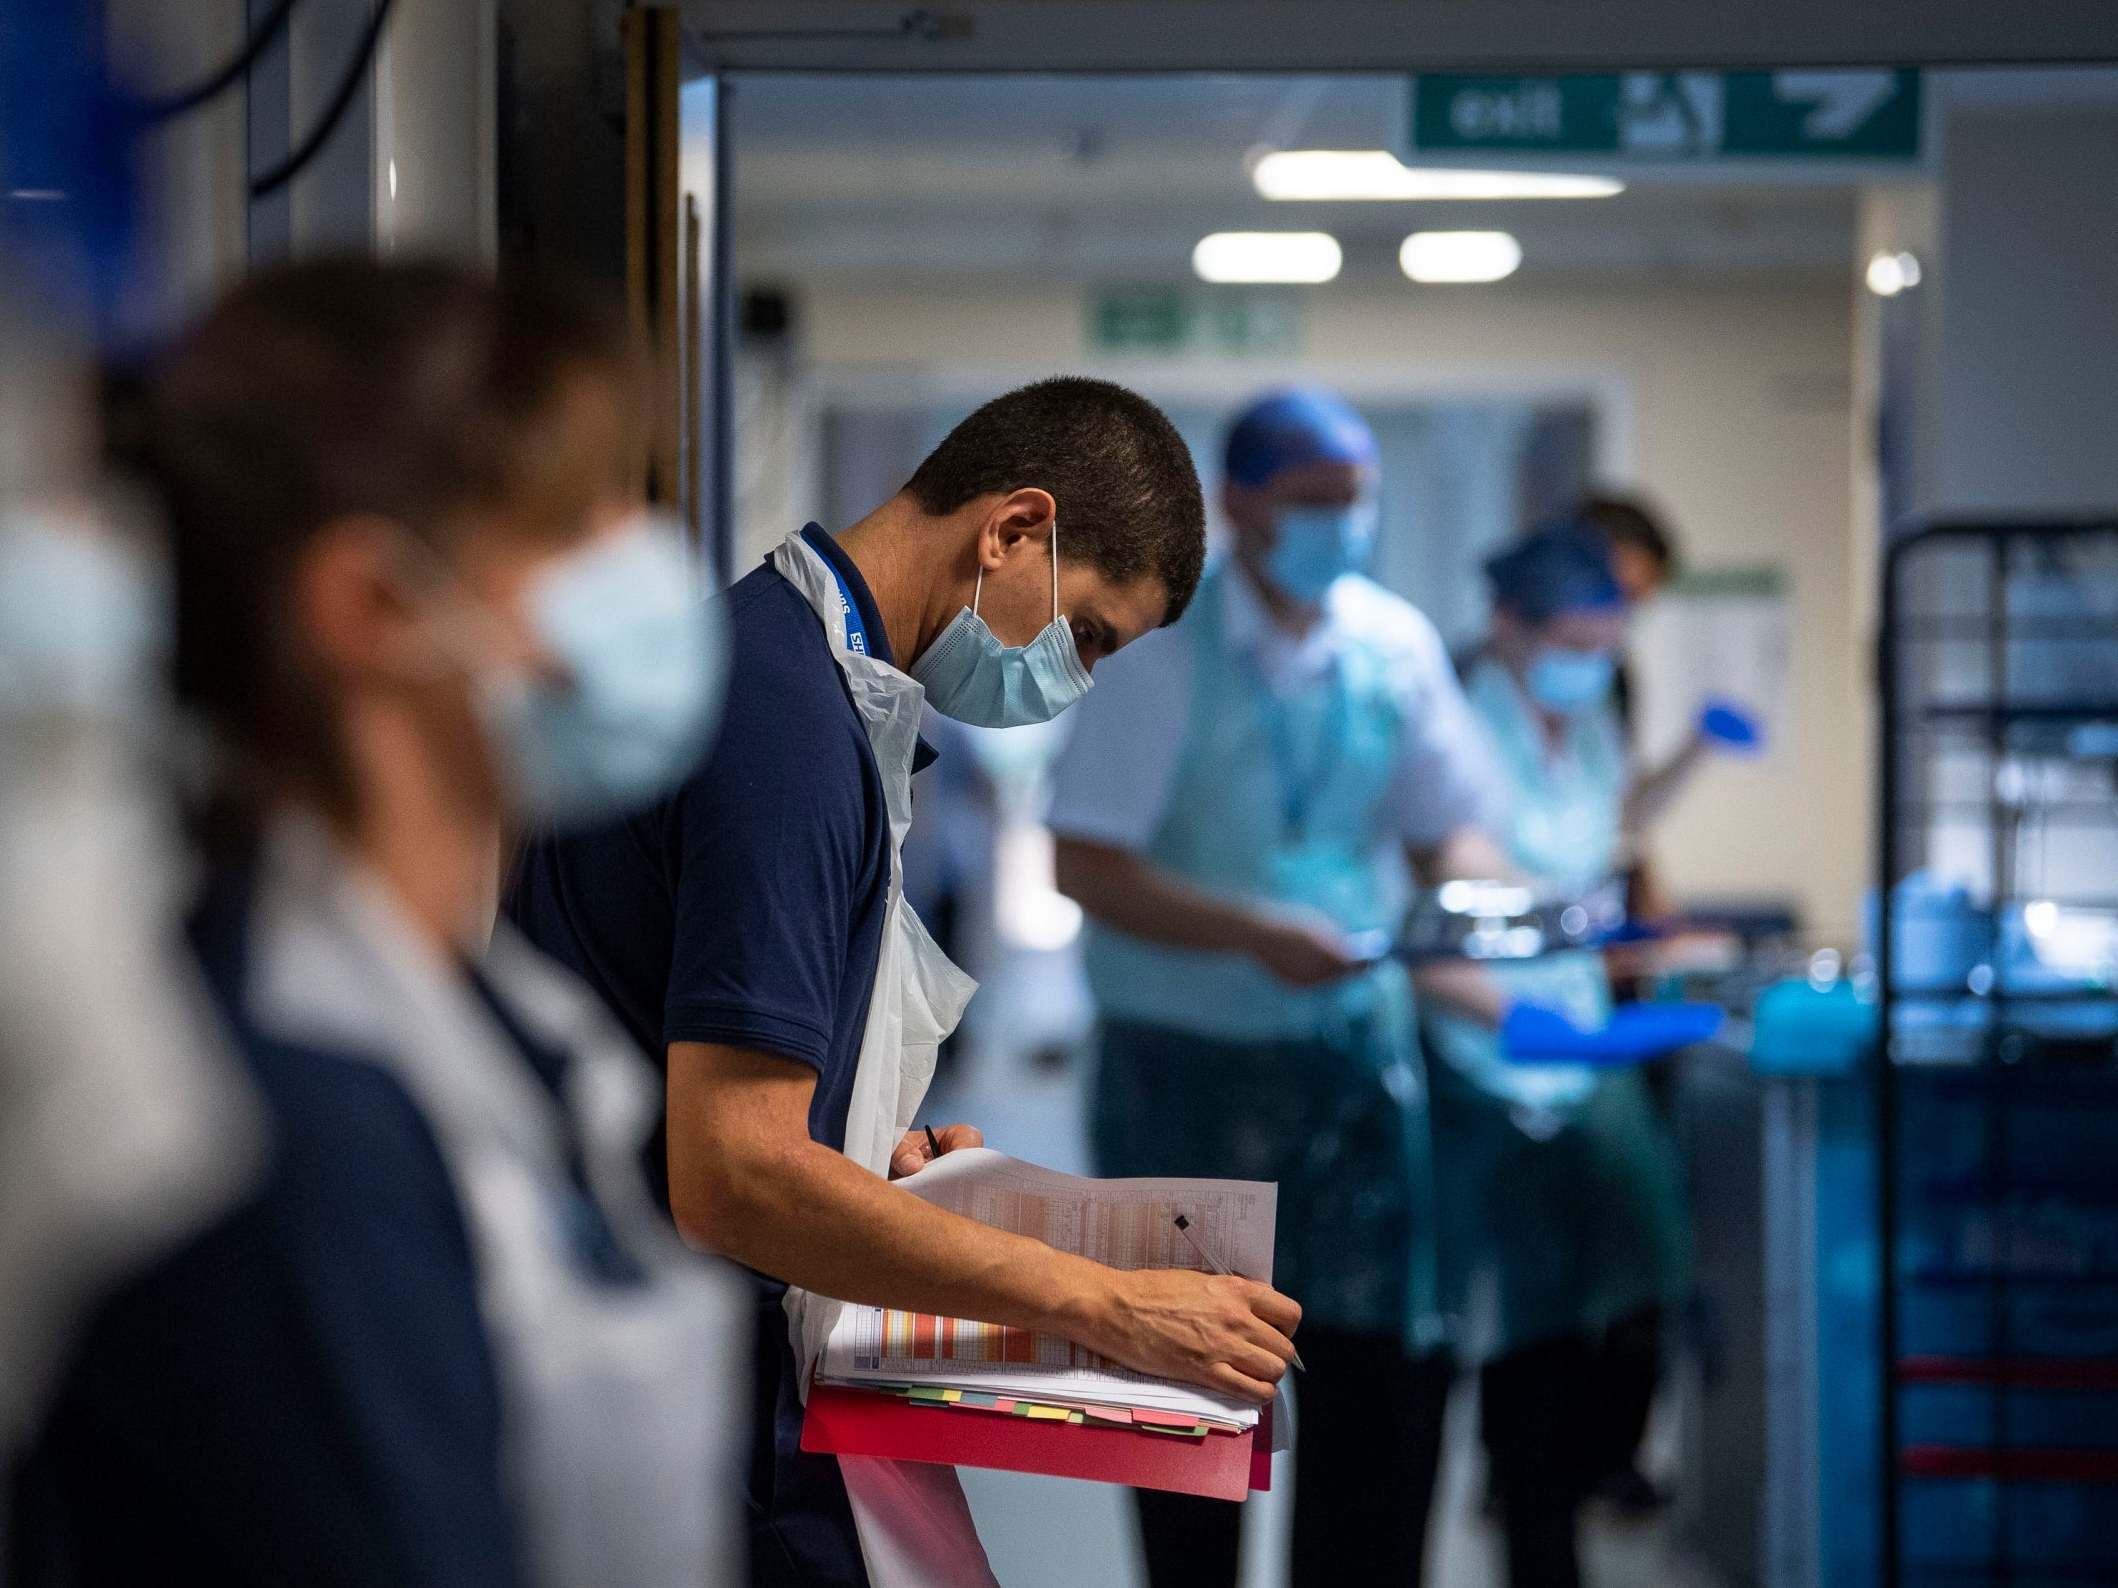 Hospitals are being forced to re-design care in the wake of the coronavirus outbreak